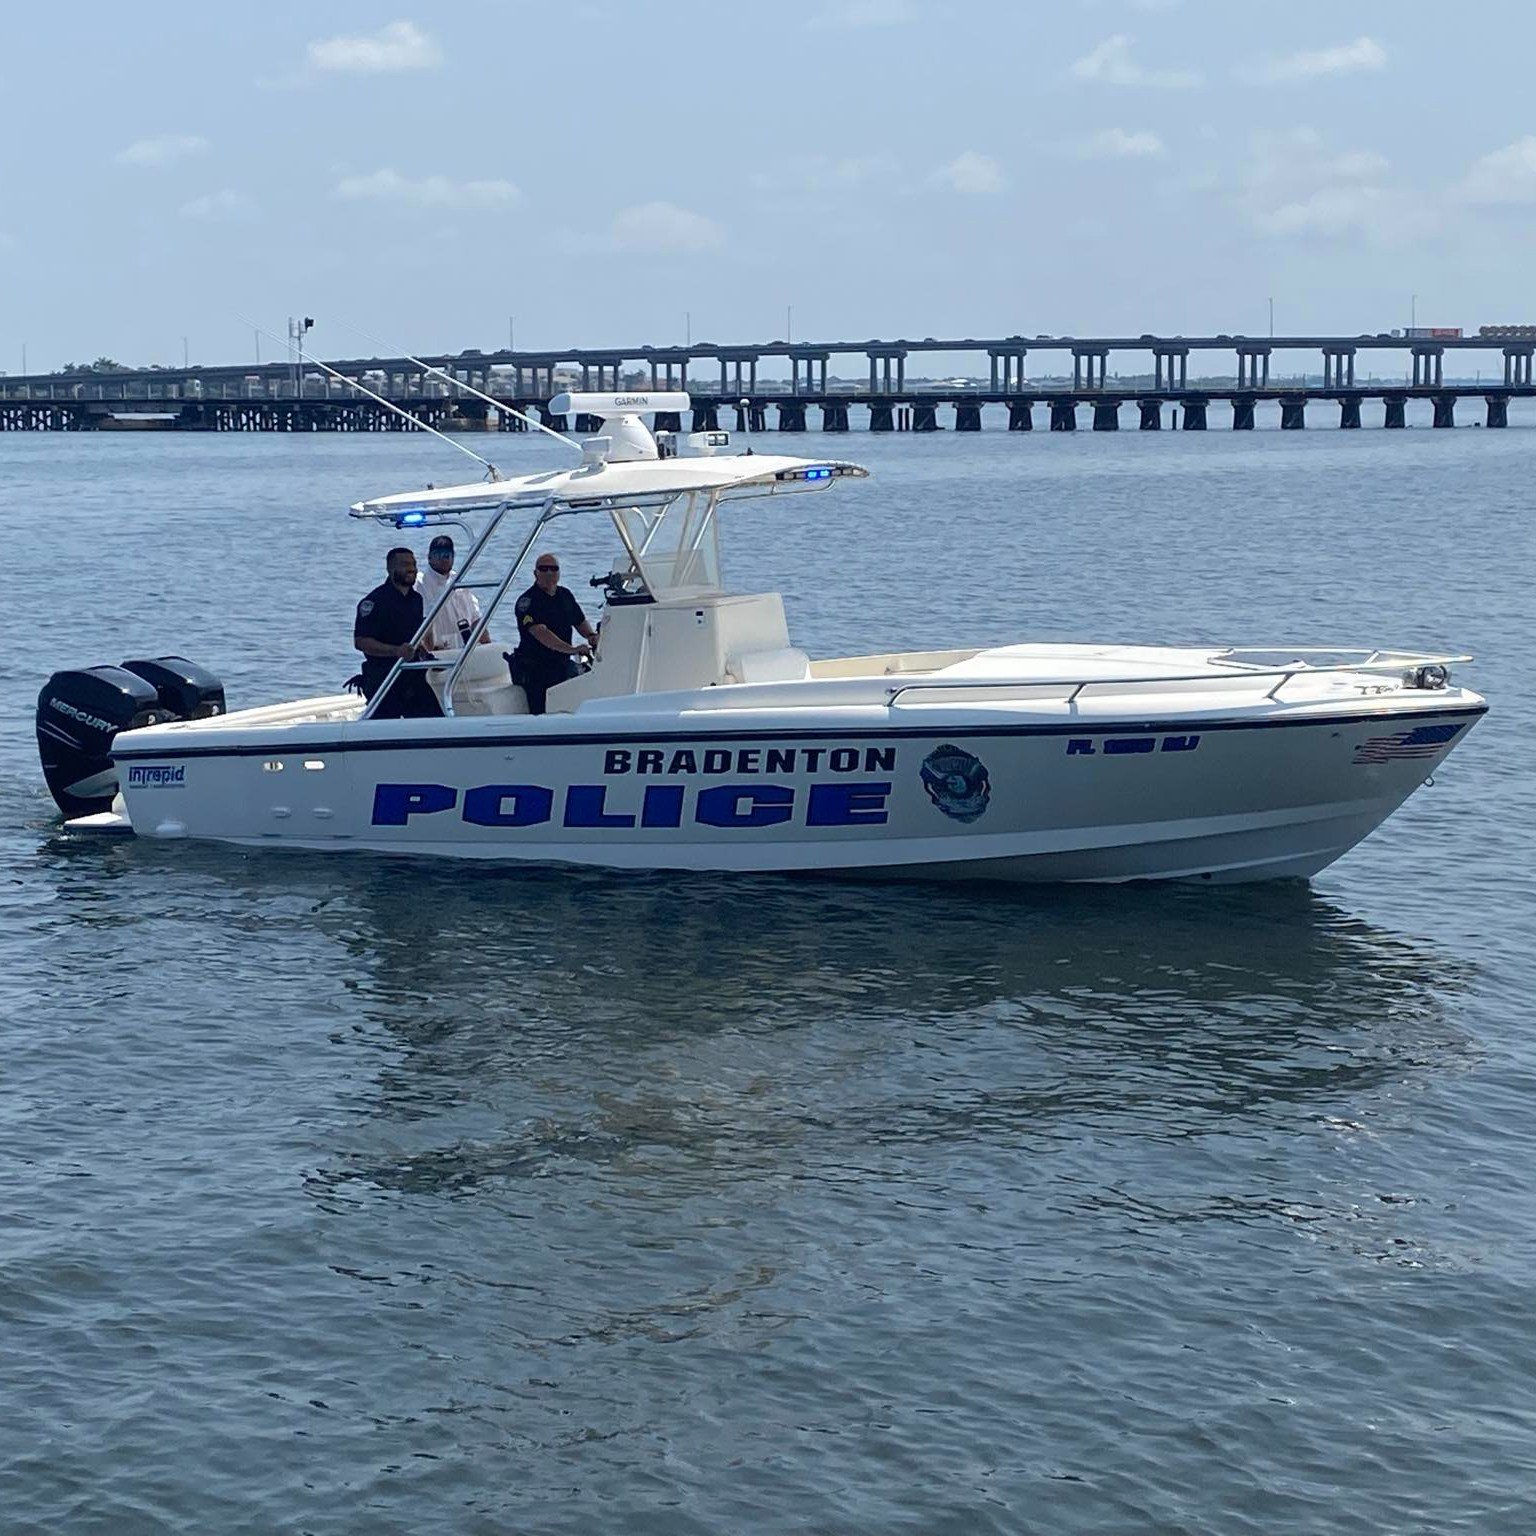 BPD Marine Unit and CRA joined community volunteers, Keep Manatee Beautiful and Suncoast Aqua-Ventures for another Manatee River underwater cleanup today. We are fortunate to live in paradise - and we want to keep it that way!